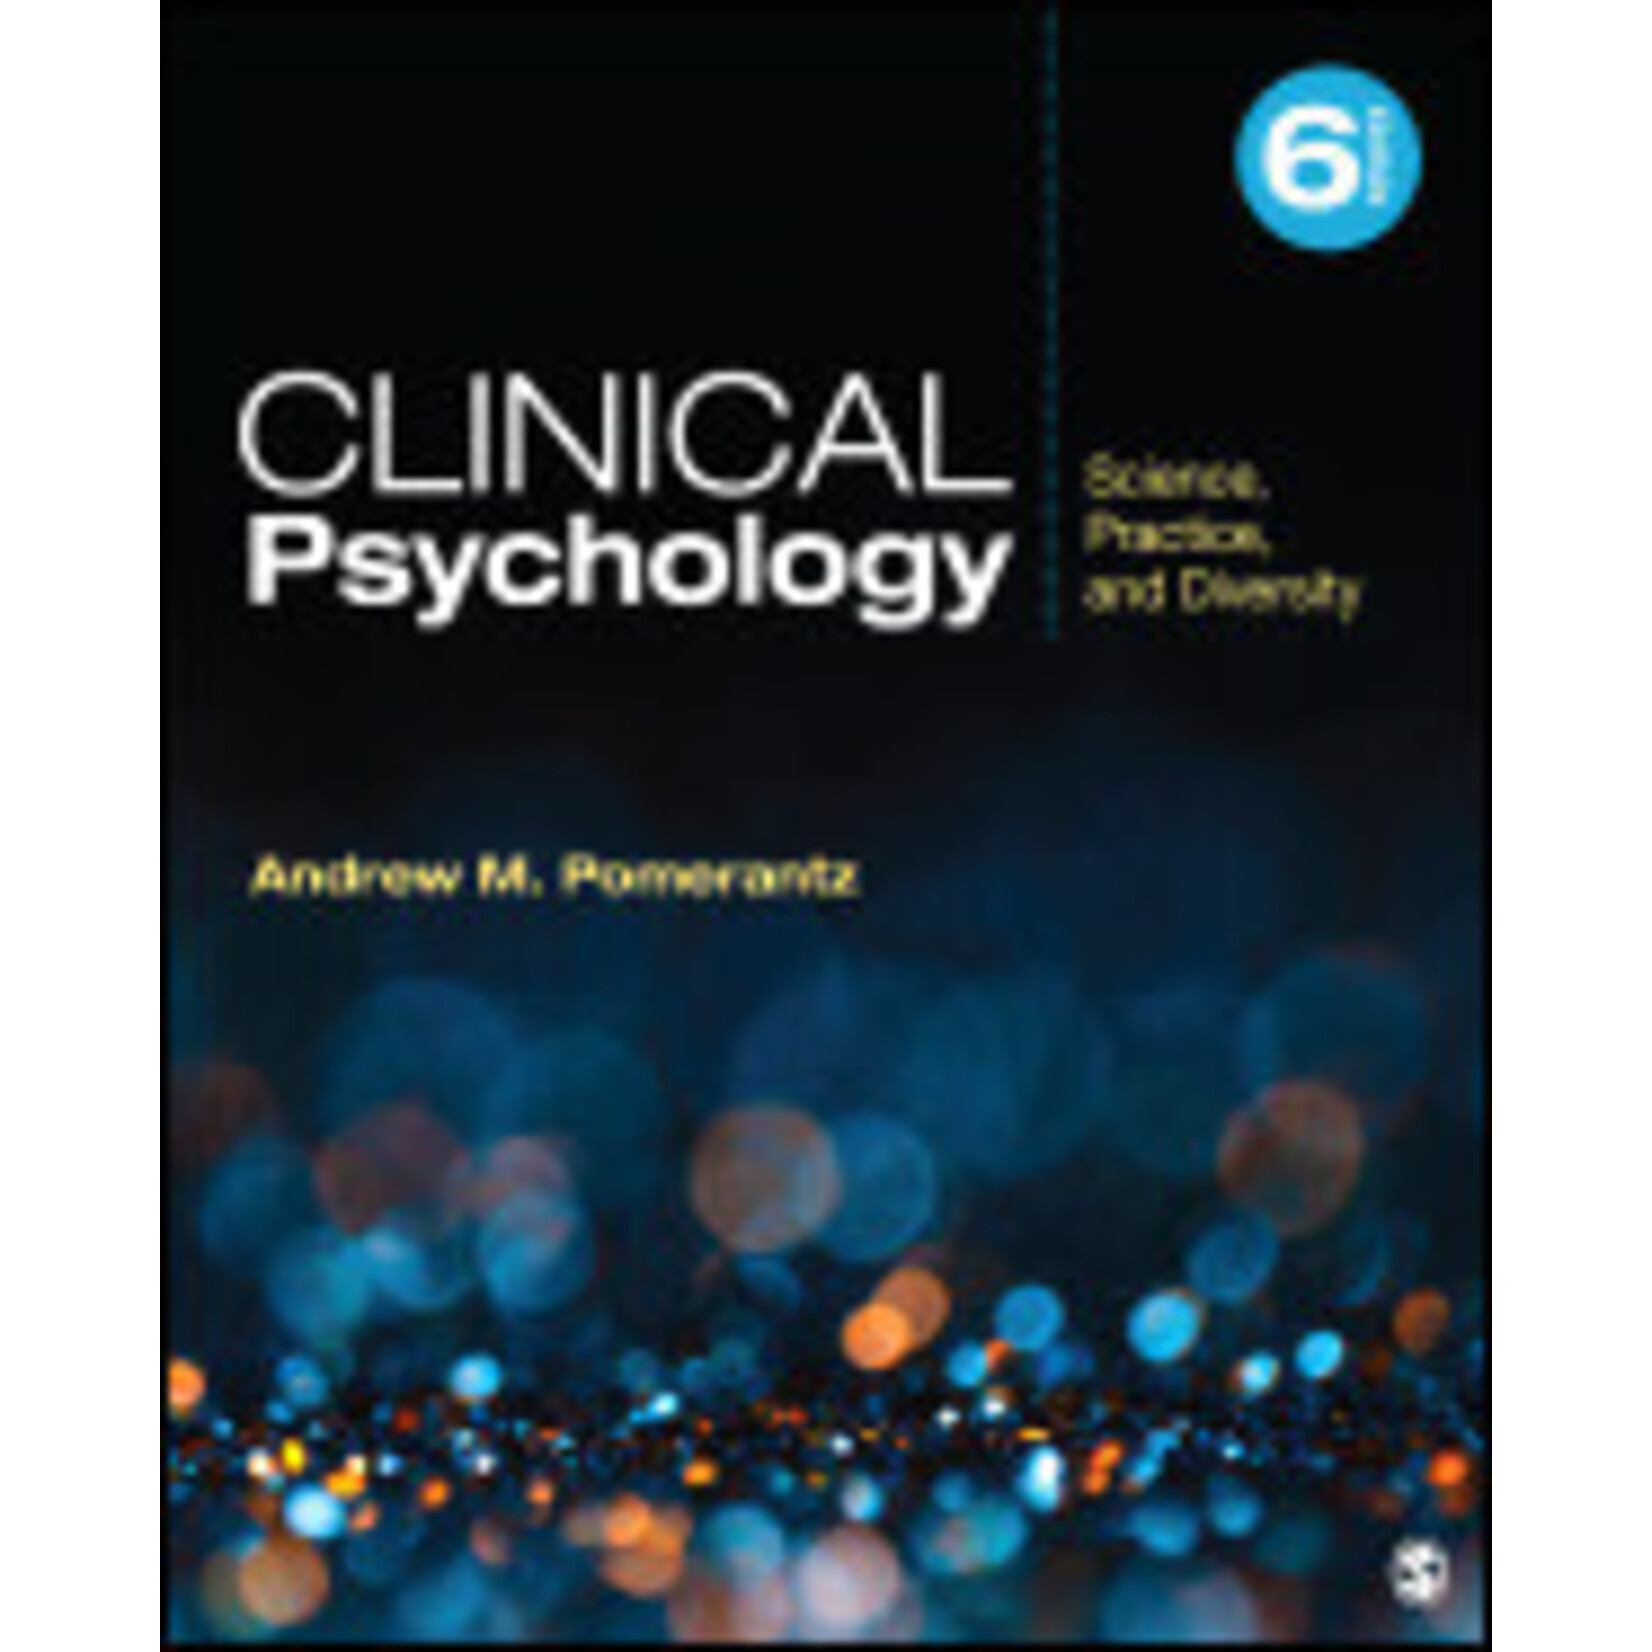 Clinical Psychology 6th Ed.